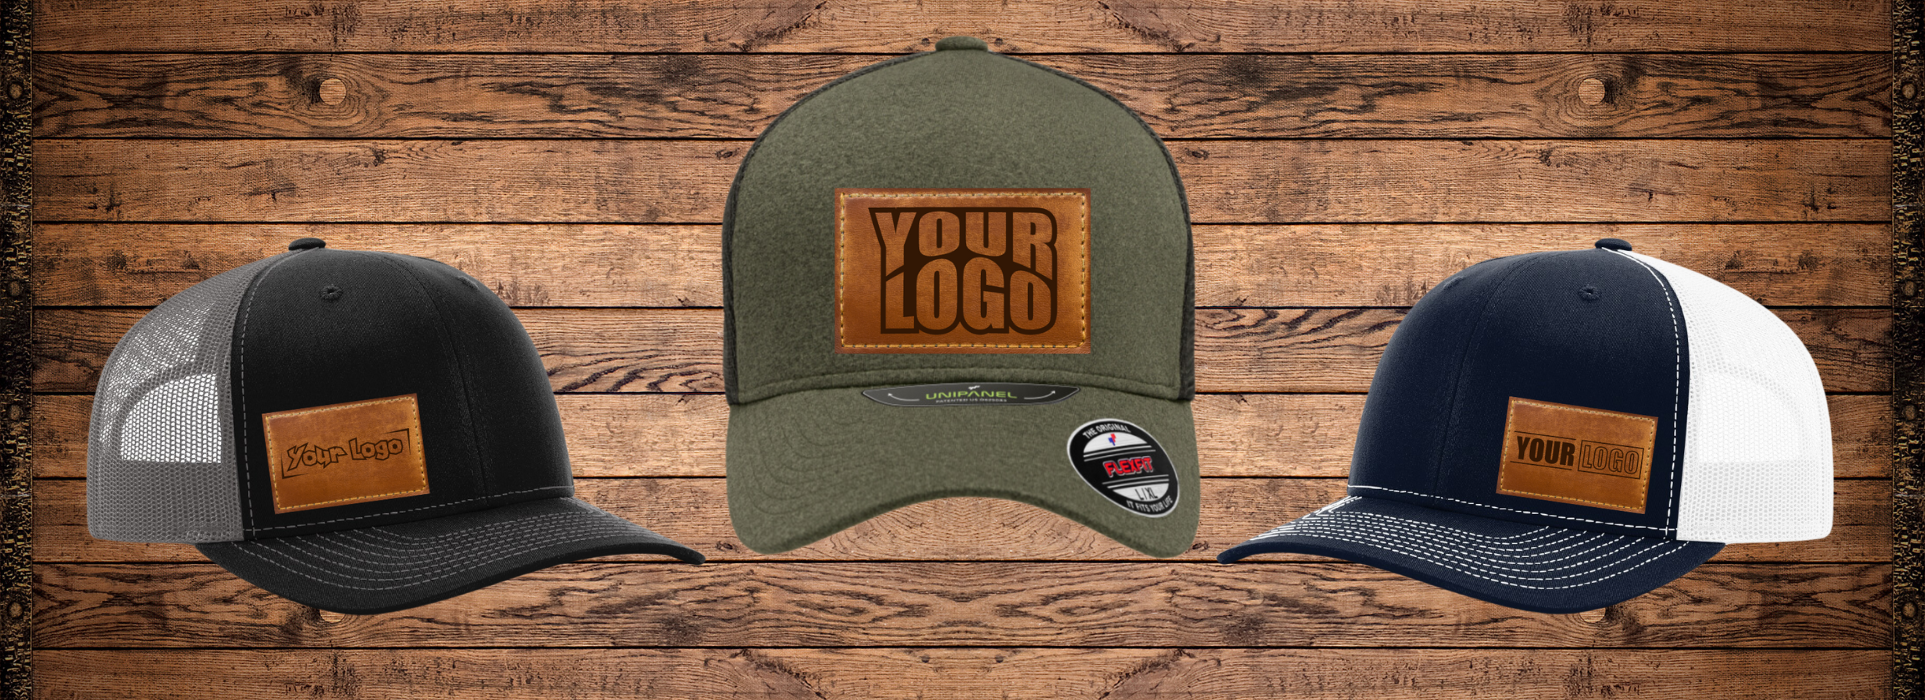 Three Trucker hats with leather patches that read "Your logo here" on a rustic wood background.